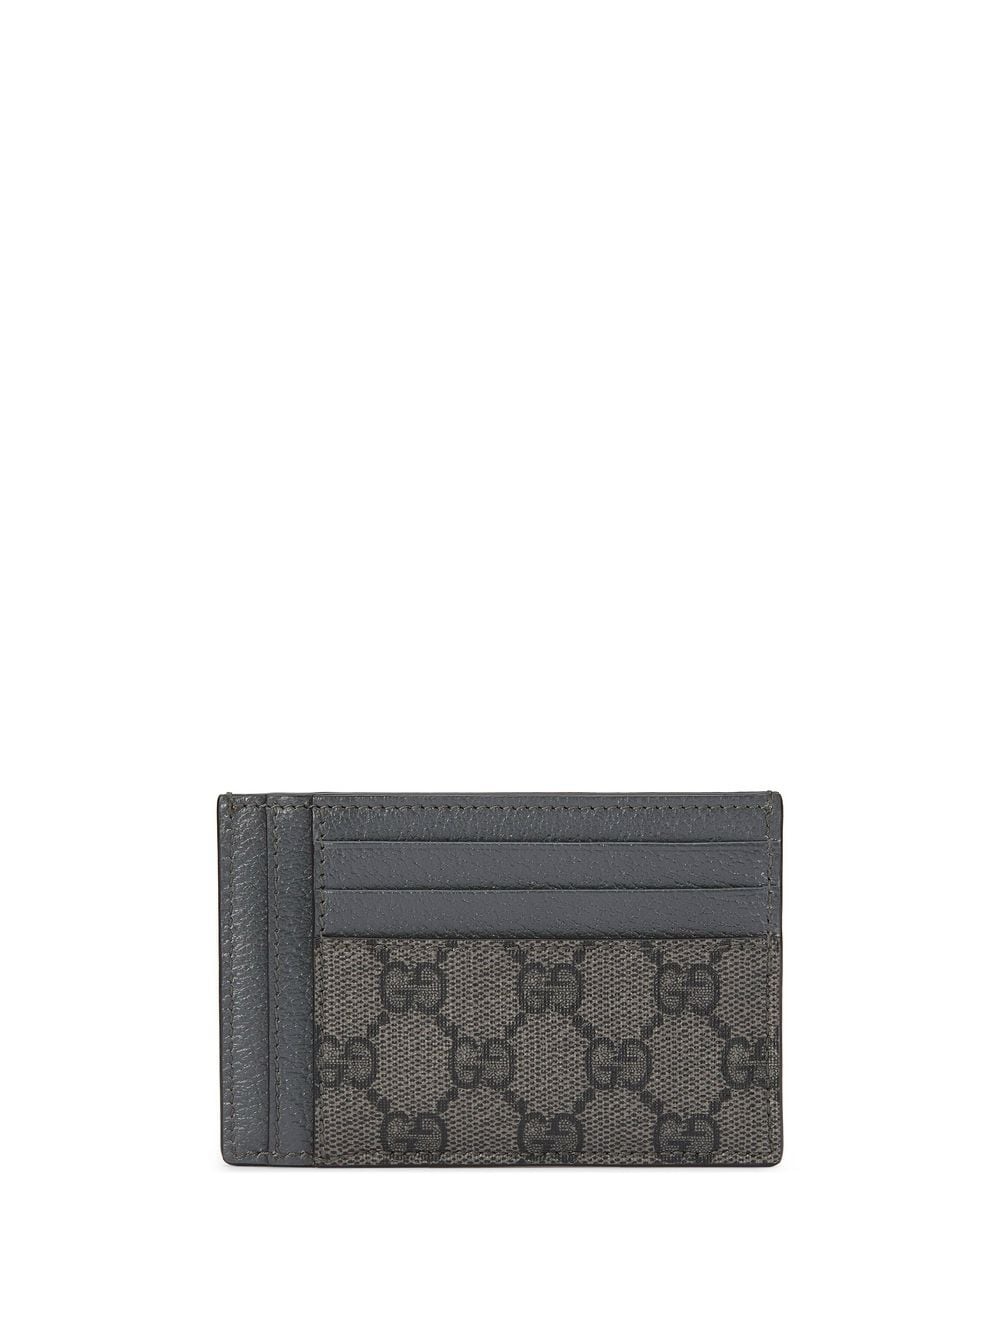 Ophidia credit card case - 4